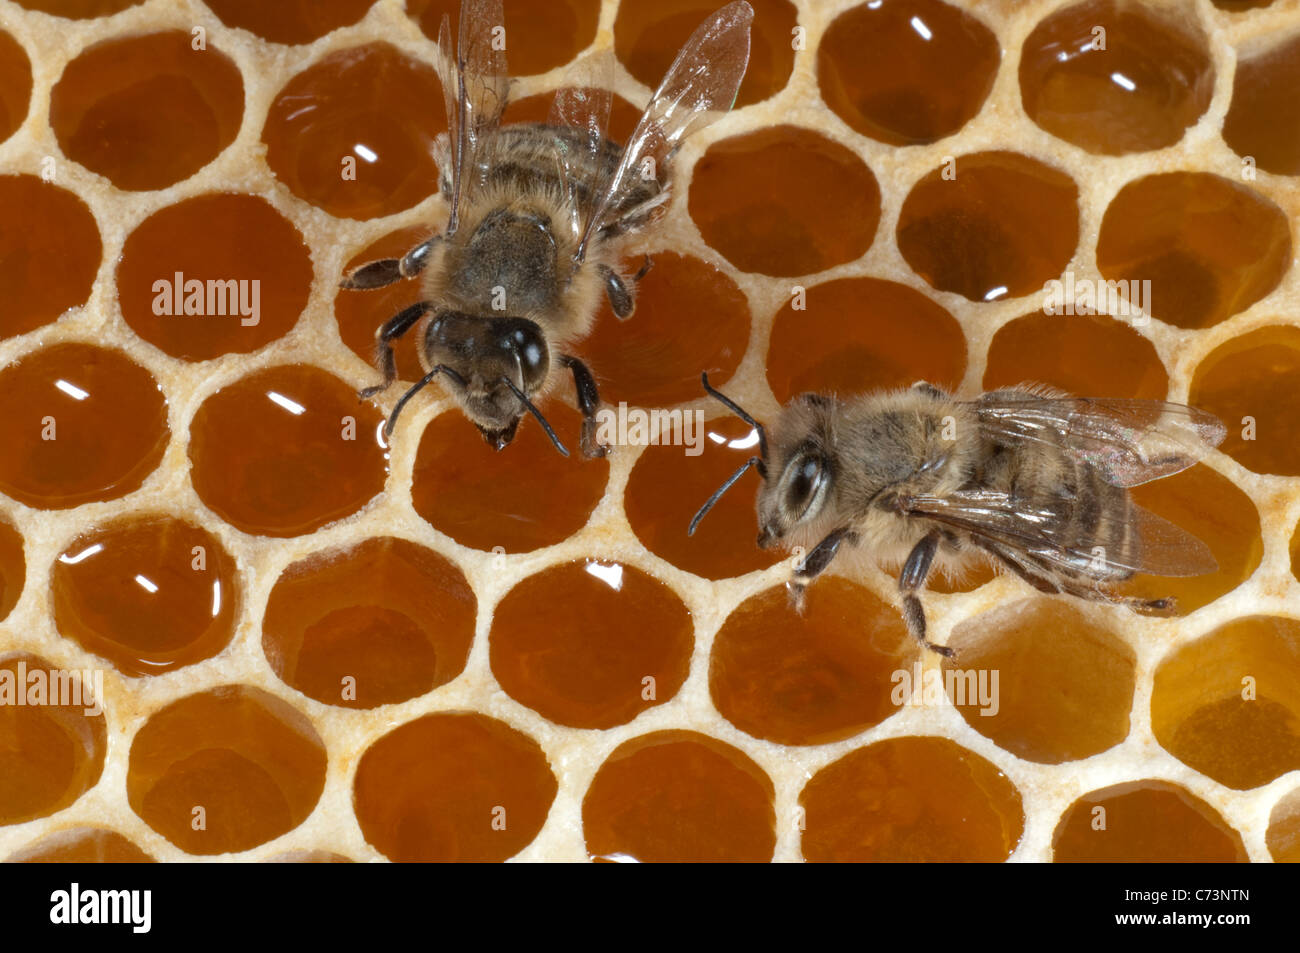 European Honey Bee, Western Honey Bee (Apis mellifera, Apis mellifica). Worker on cells of a honeycomb filled with honey. Stock Photo